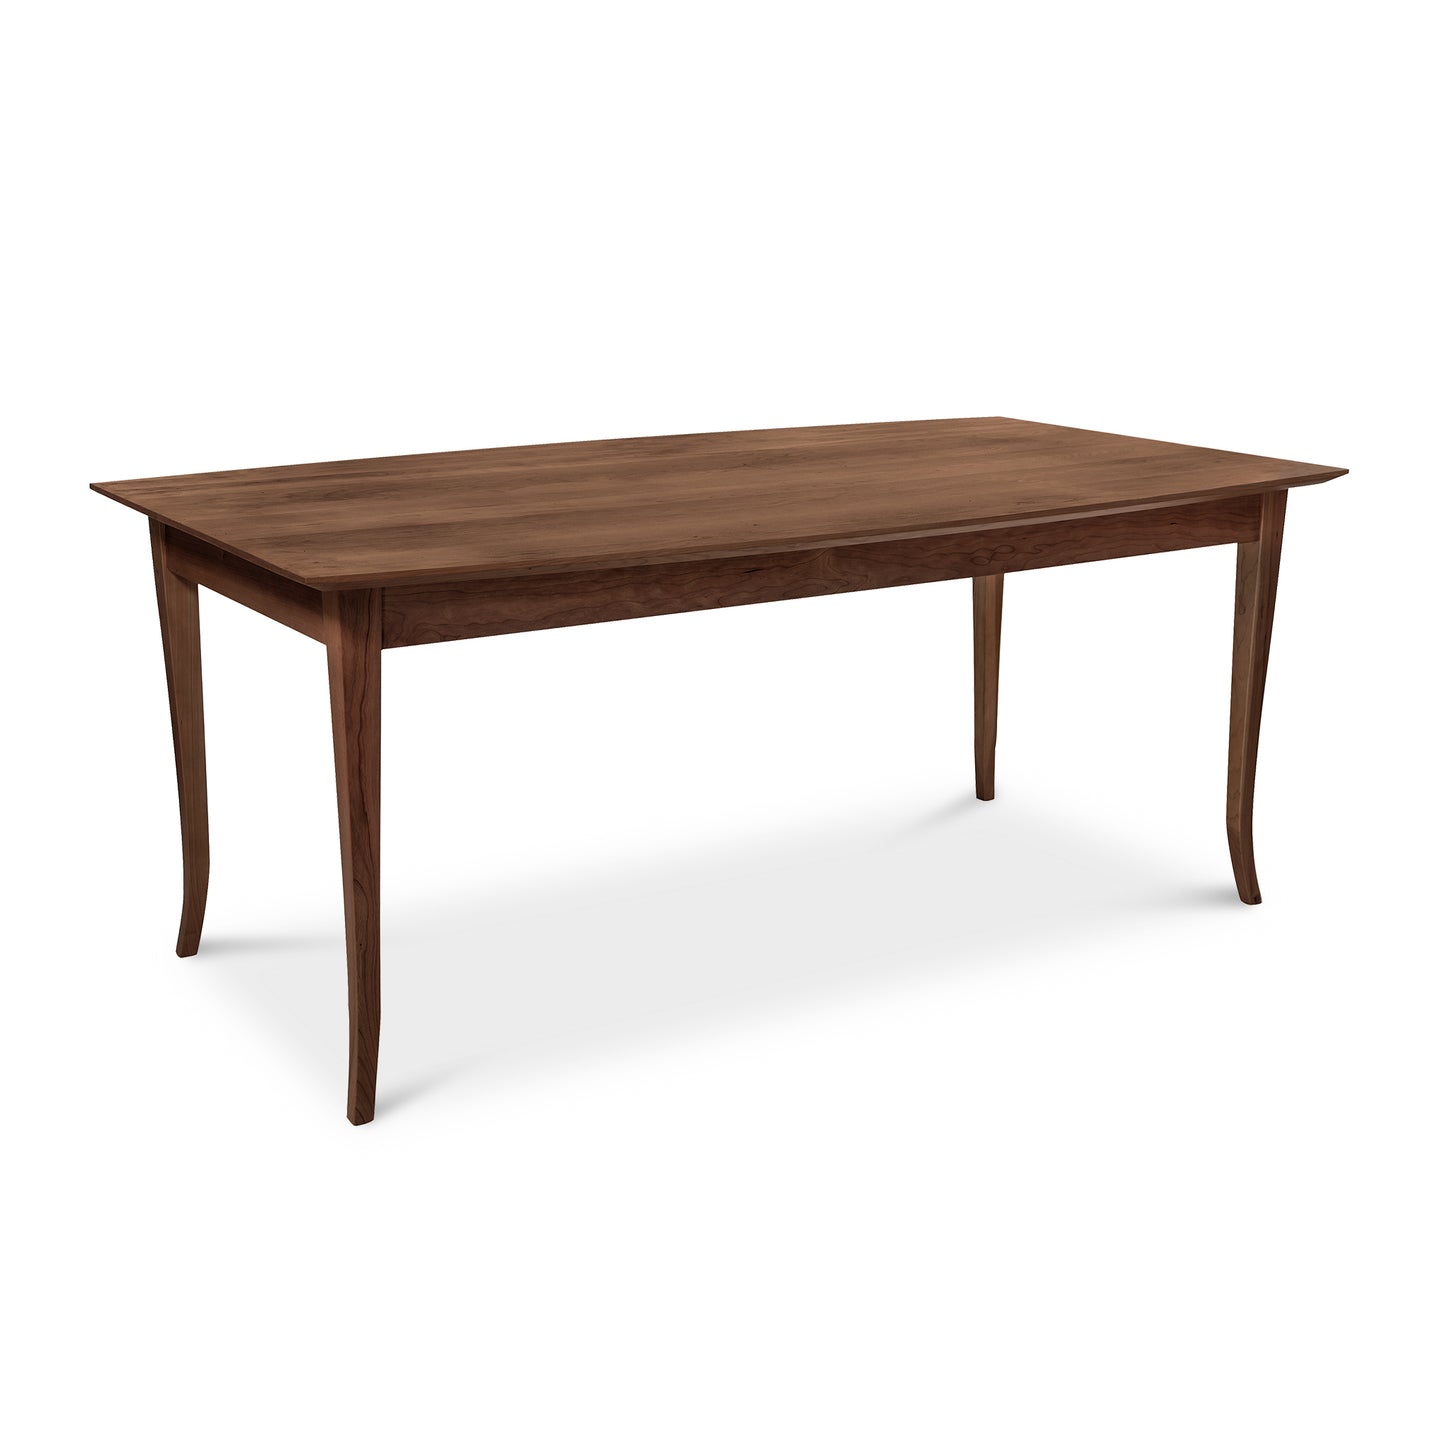 A Classic Shaker Flare Leg Solid Boat Top Table by Lyndon Furniture with beveled edge profile and flare legs.